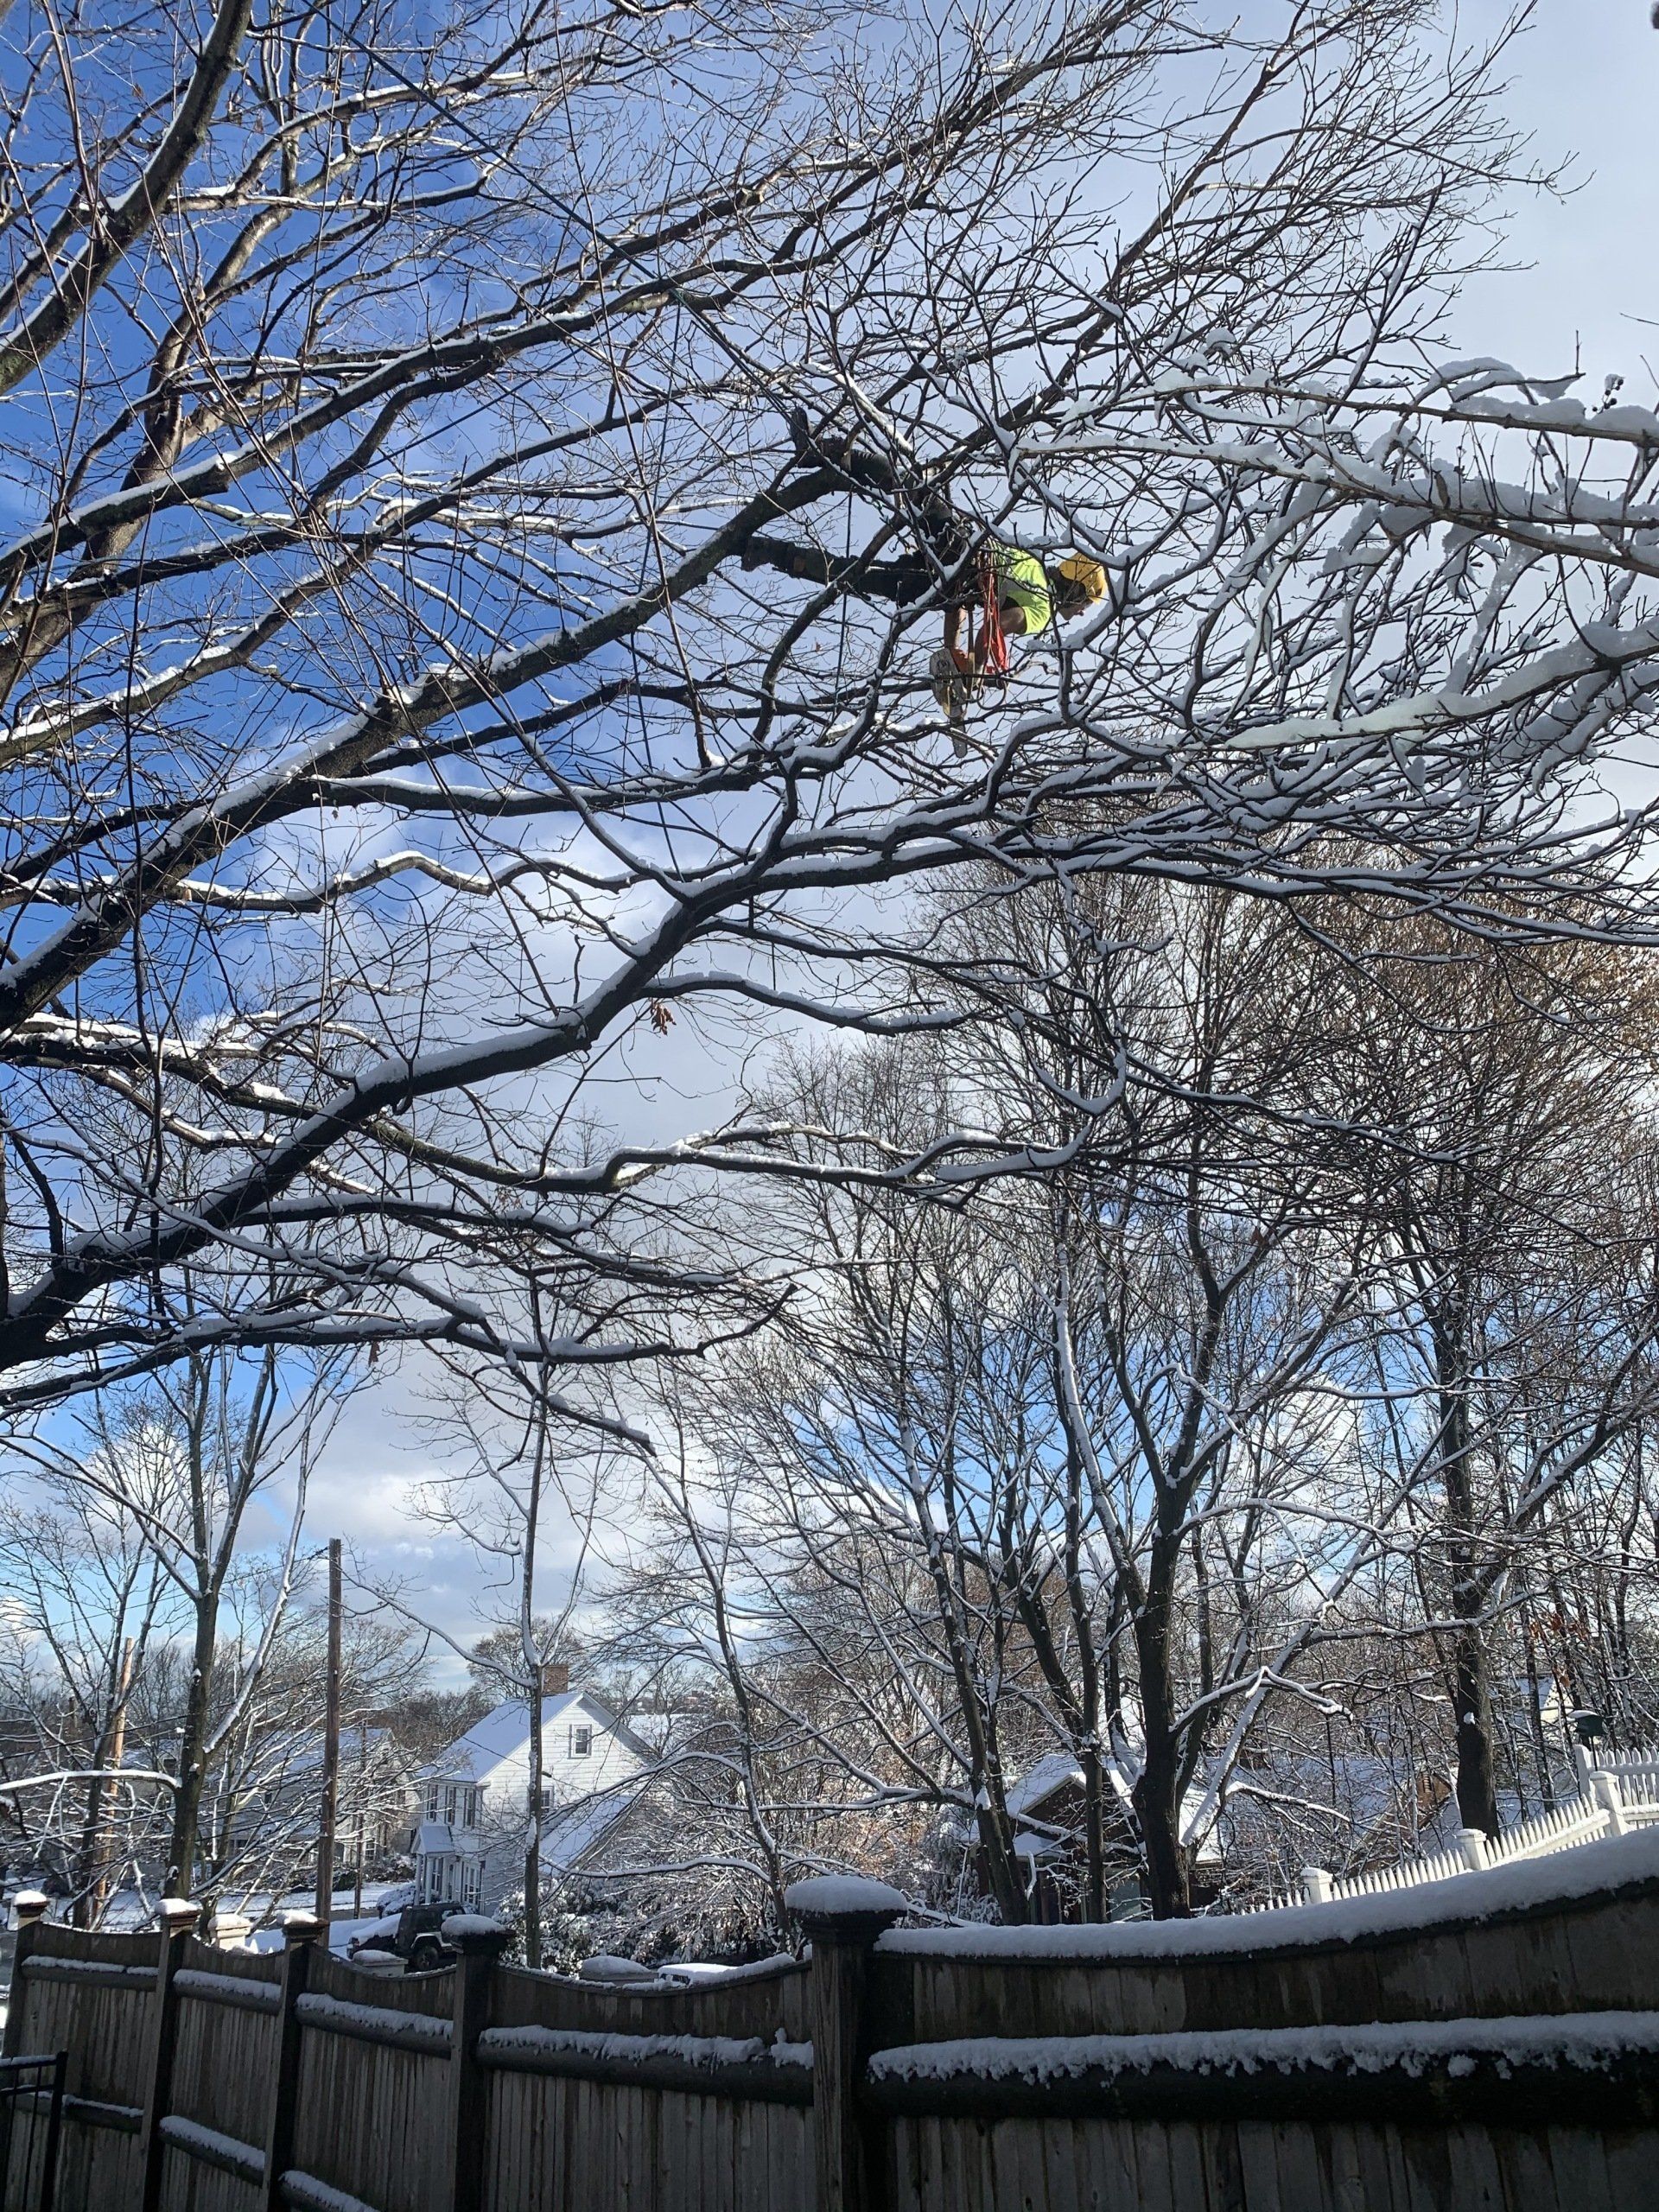 Tree Removal Halifax MA Arborist climbing and trimming a tree using proper reduction cuts